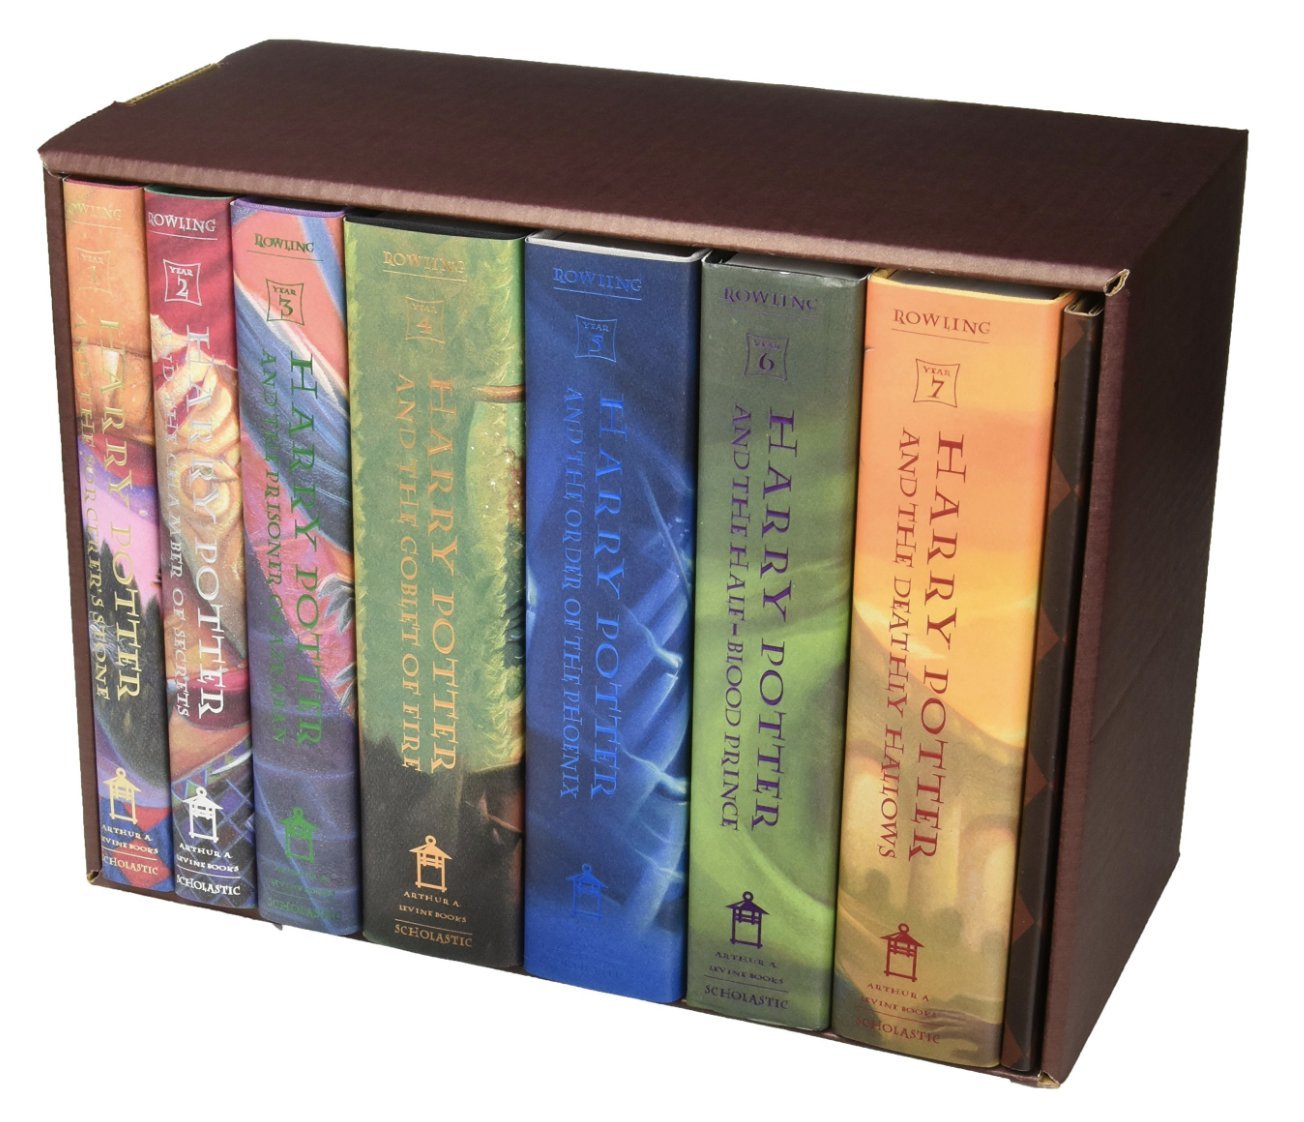 Harry Potter Hardcover Limited Edition Boxed Set: All 7 Books in Chest BRAND NEW